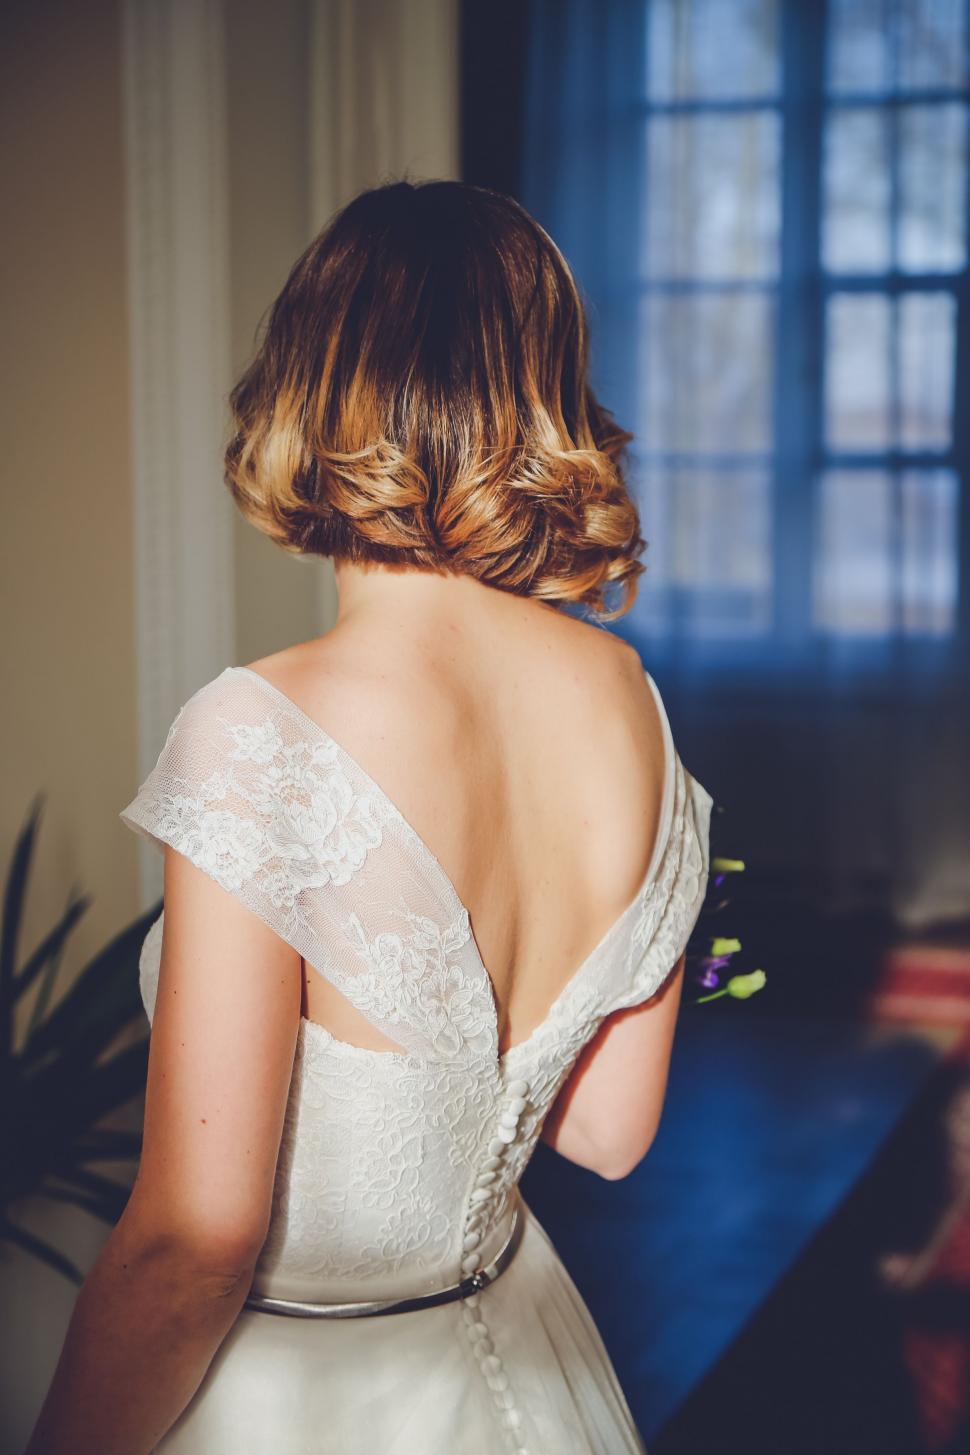 Free Image of Woman in Wedding Dress Looking Out a Window 